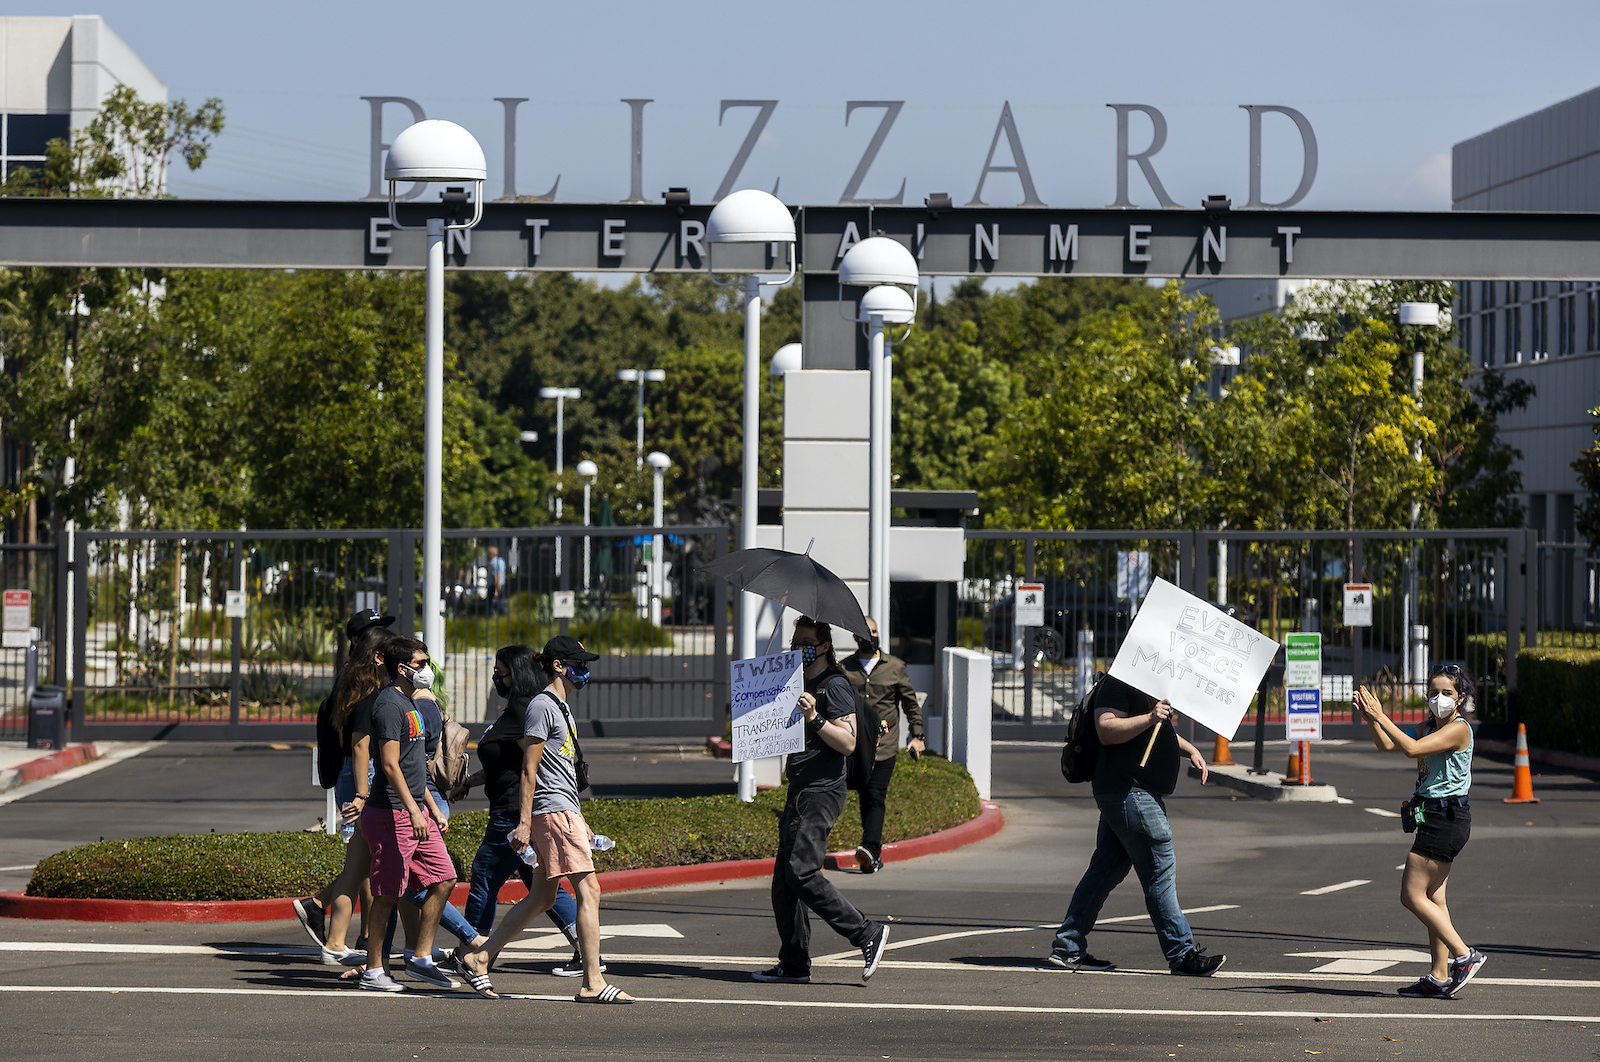 Irvine, CA - July 28: Several hundred Activision Blizzard employees stage a walkout which they say is in a response from company leadership to a lawsuit highlighting alleged harassment, inequality, and more within the company outside the gate at Activision Blizzard headquarters on Wednesday, July 28, 2021 in Irvine, CA. (Allen J. Schaben / Los Angeles Times via Getty Images)